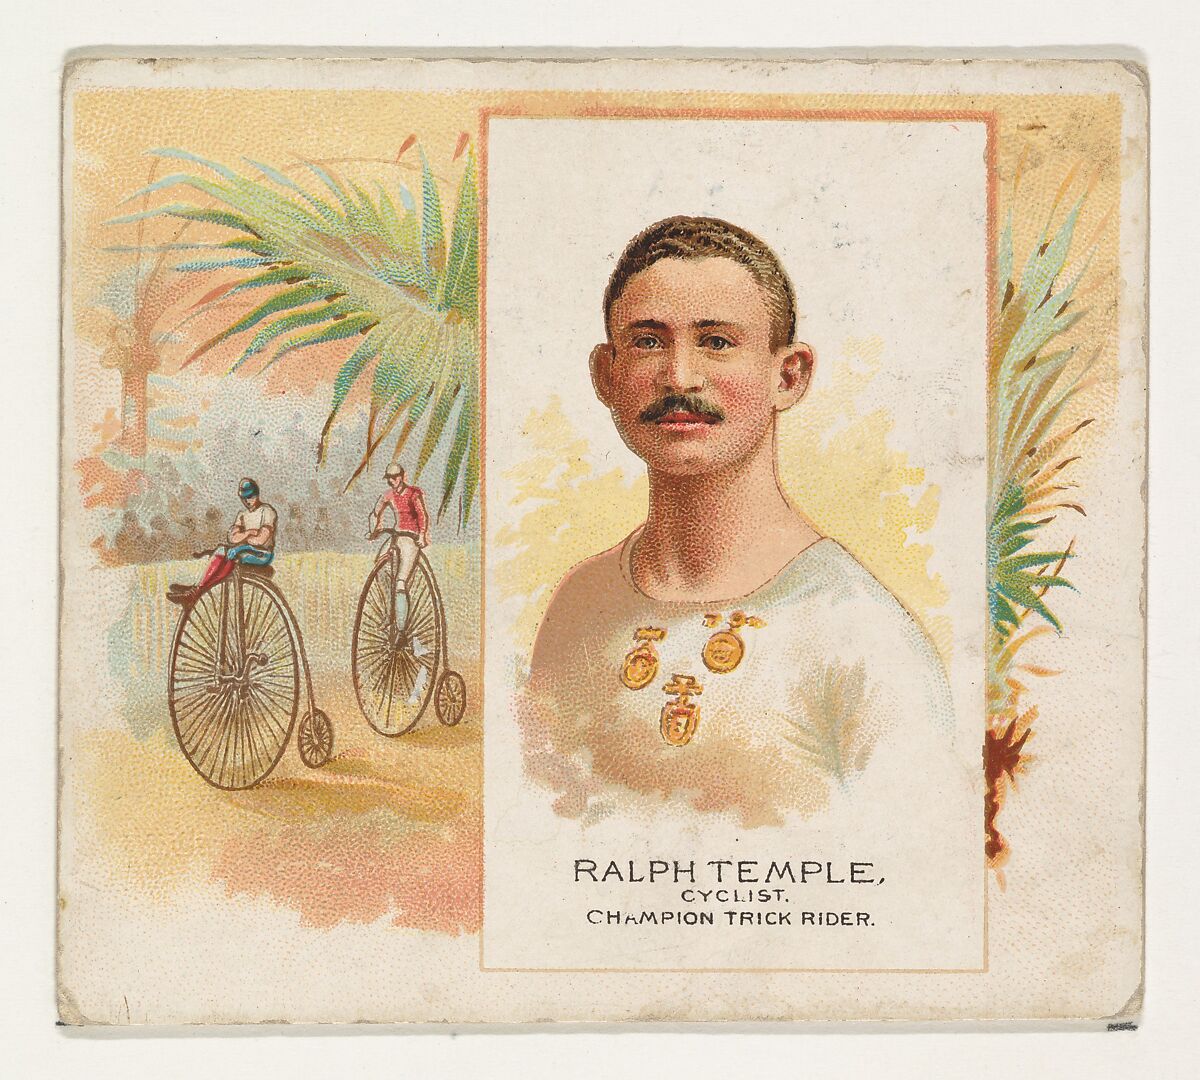 Ralph Temple, Cyclist, Champion Trick Rider, from World's Champions, Second Series (N43) for Allen & Ginter Cigarettes, Allen &amp; Ginter (American, Richmond, Virginia), Commercial lithograph 